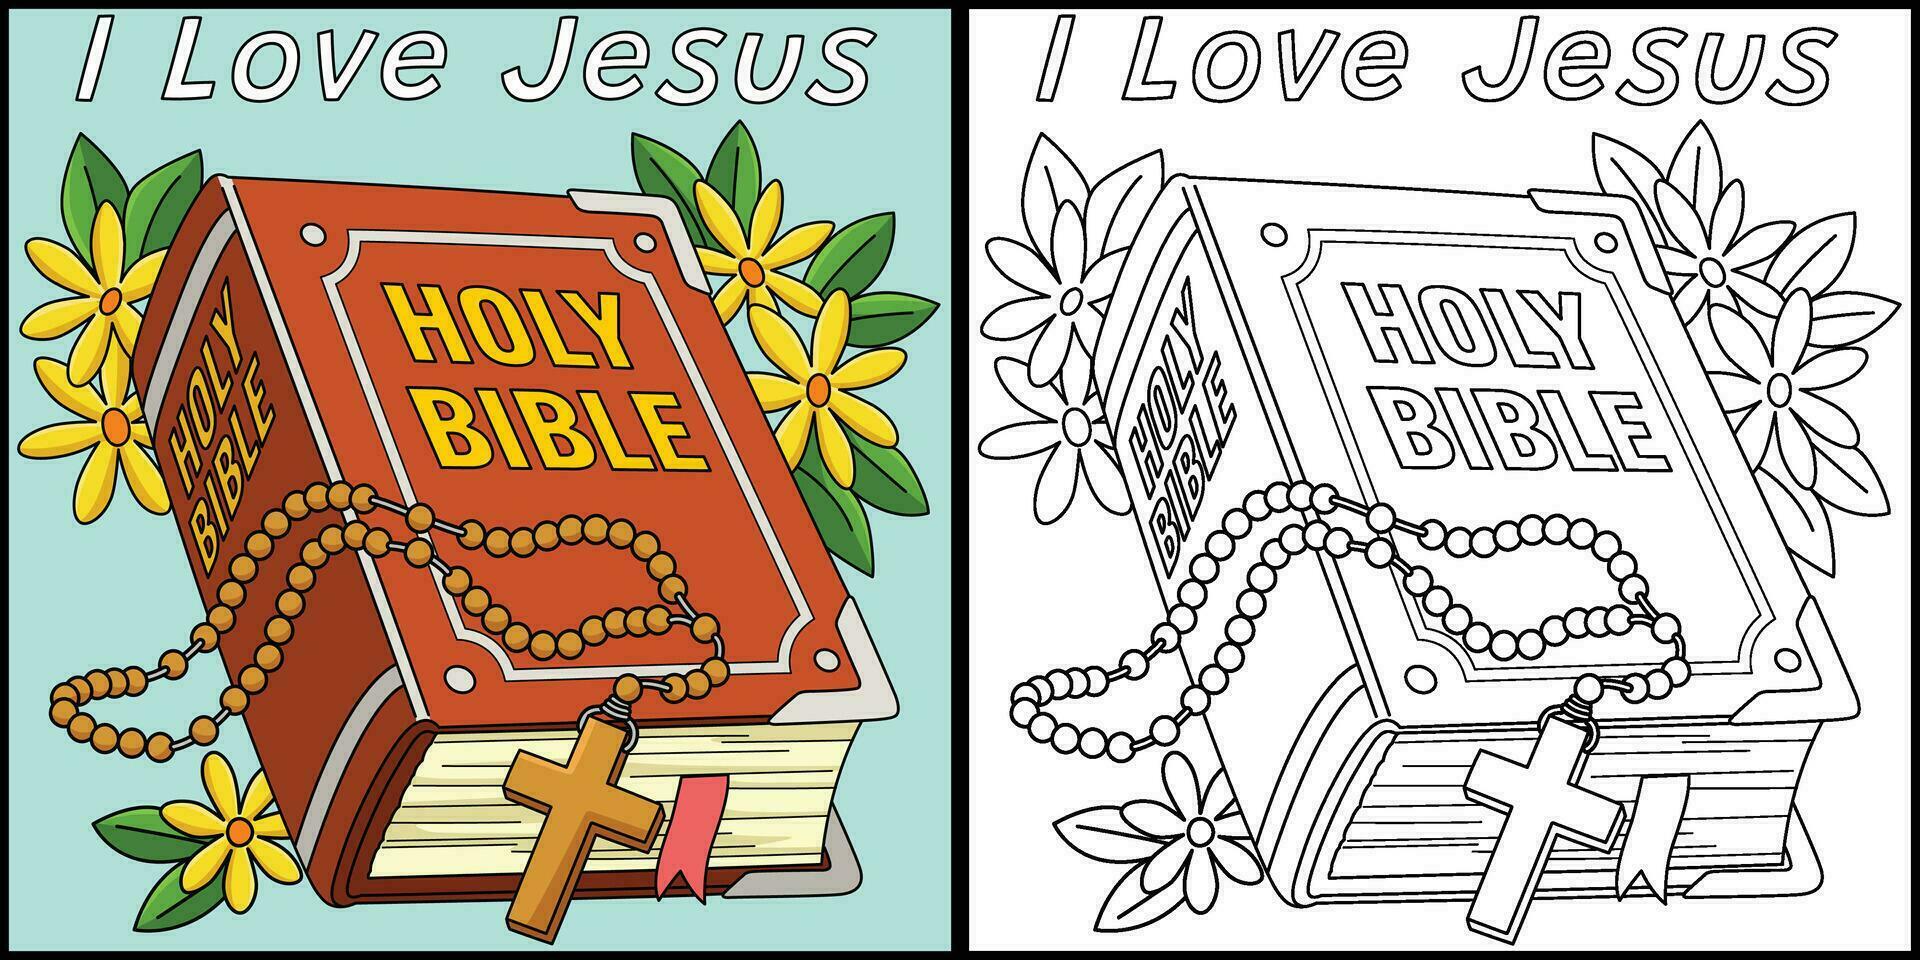 Christian I Love Jesus Coloring Page Illustration vector